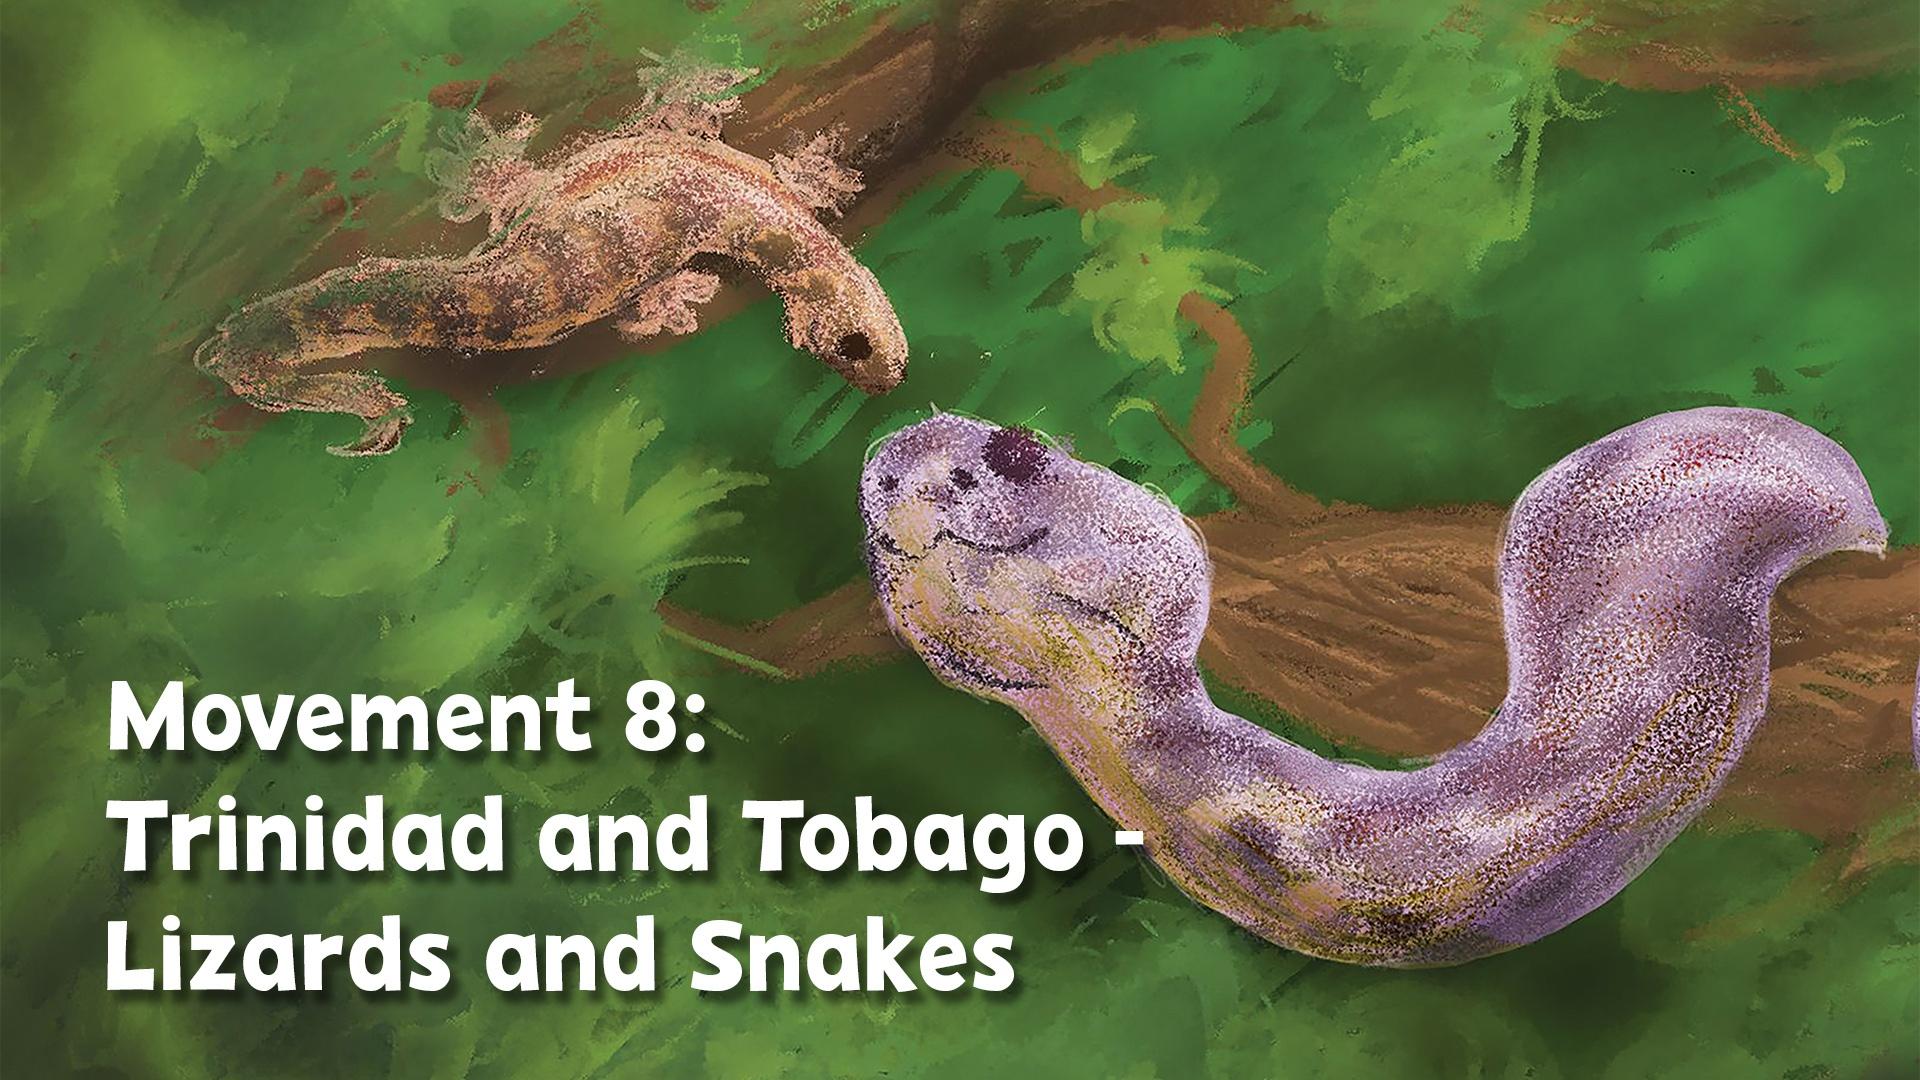 A drawing of a snake and a lizard on tree branches.